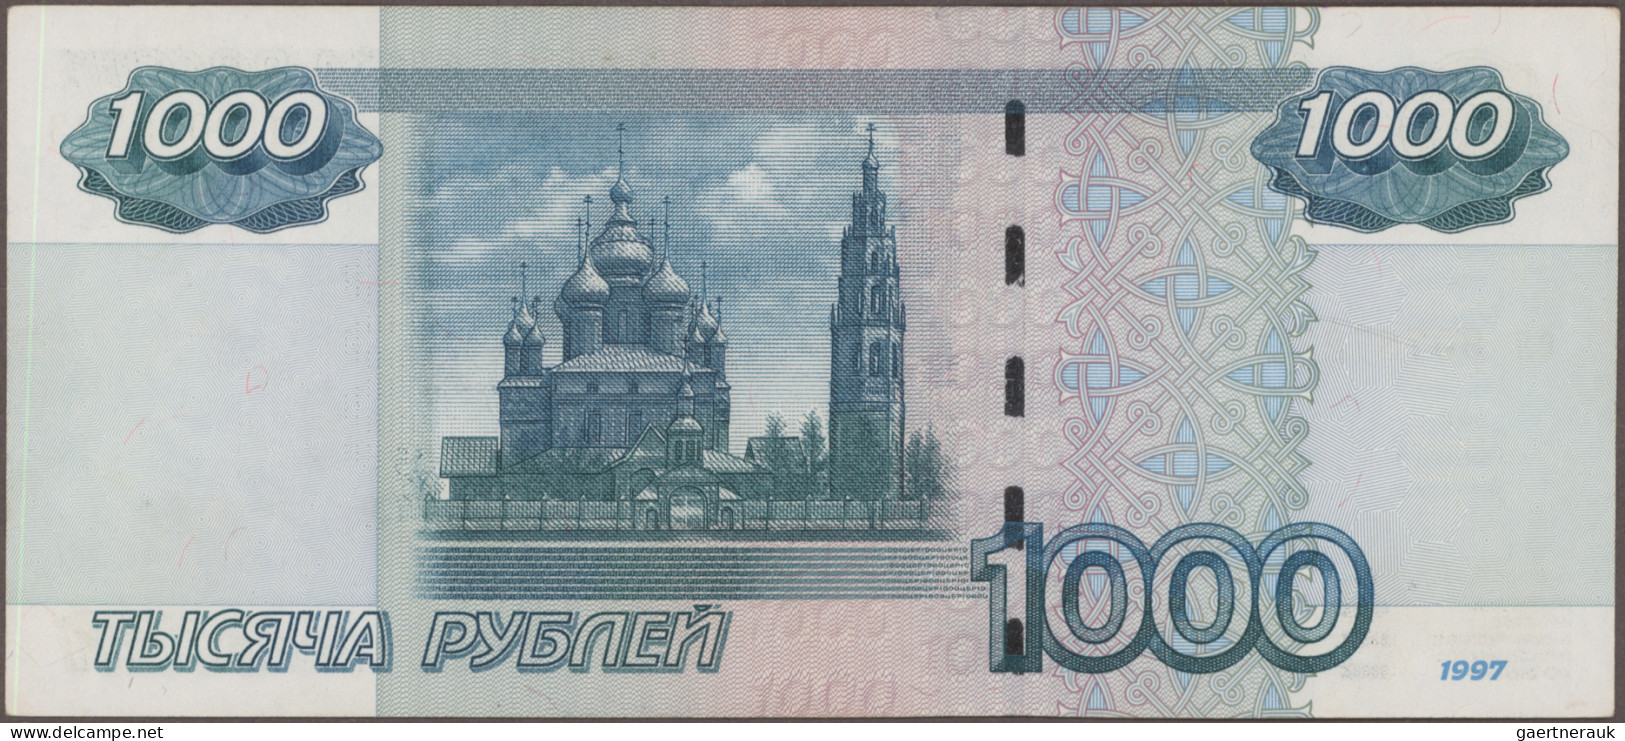 Russia - Bank Notes: Collectors album with 128 banknotes Russia State Issues 189